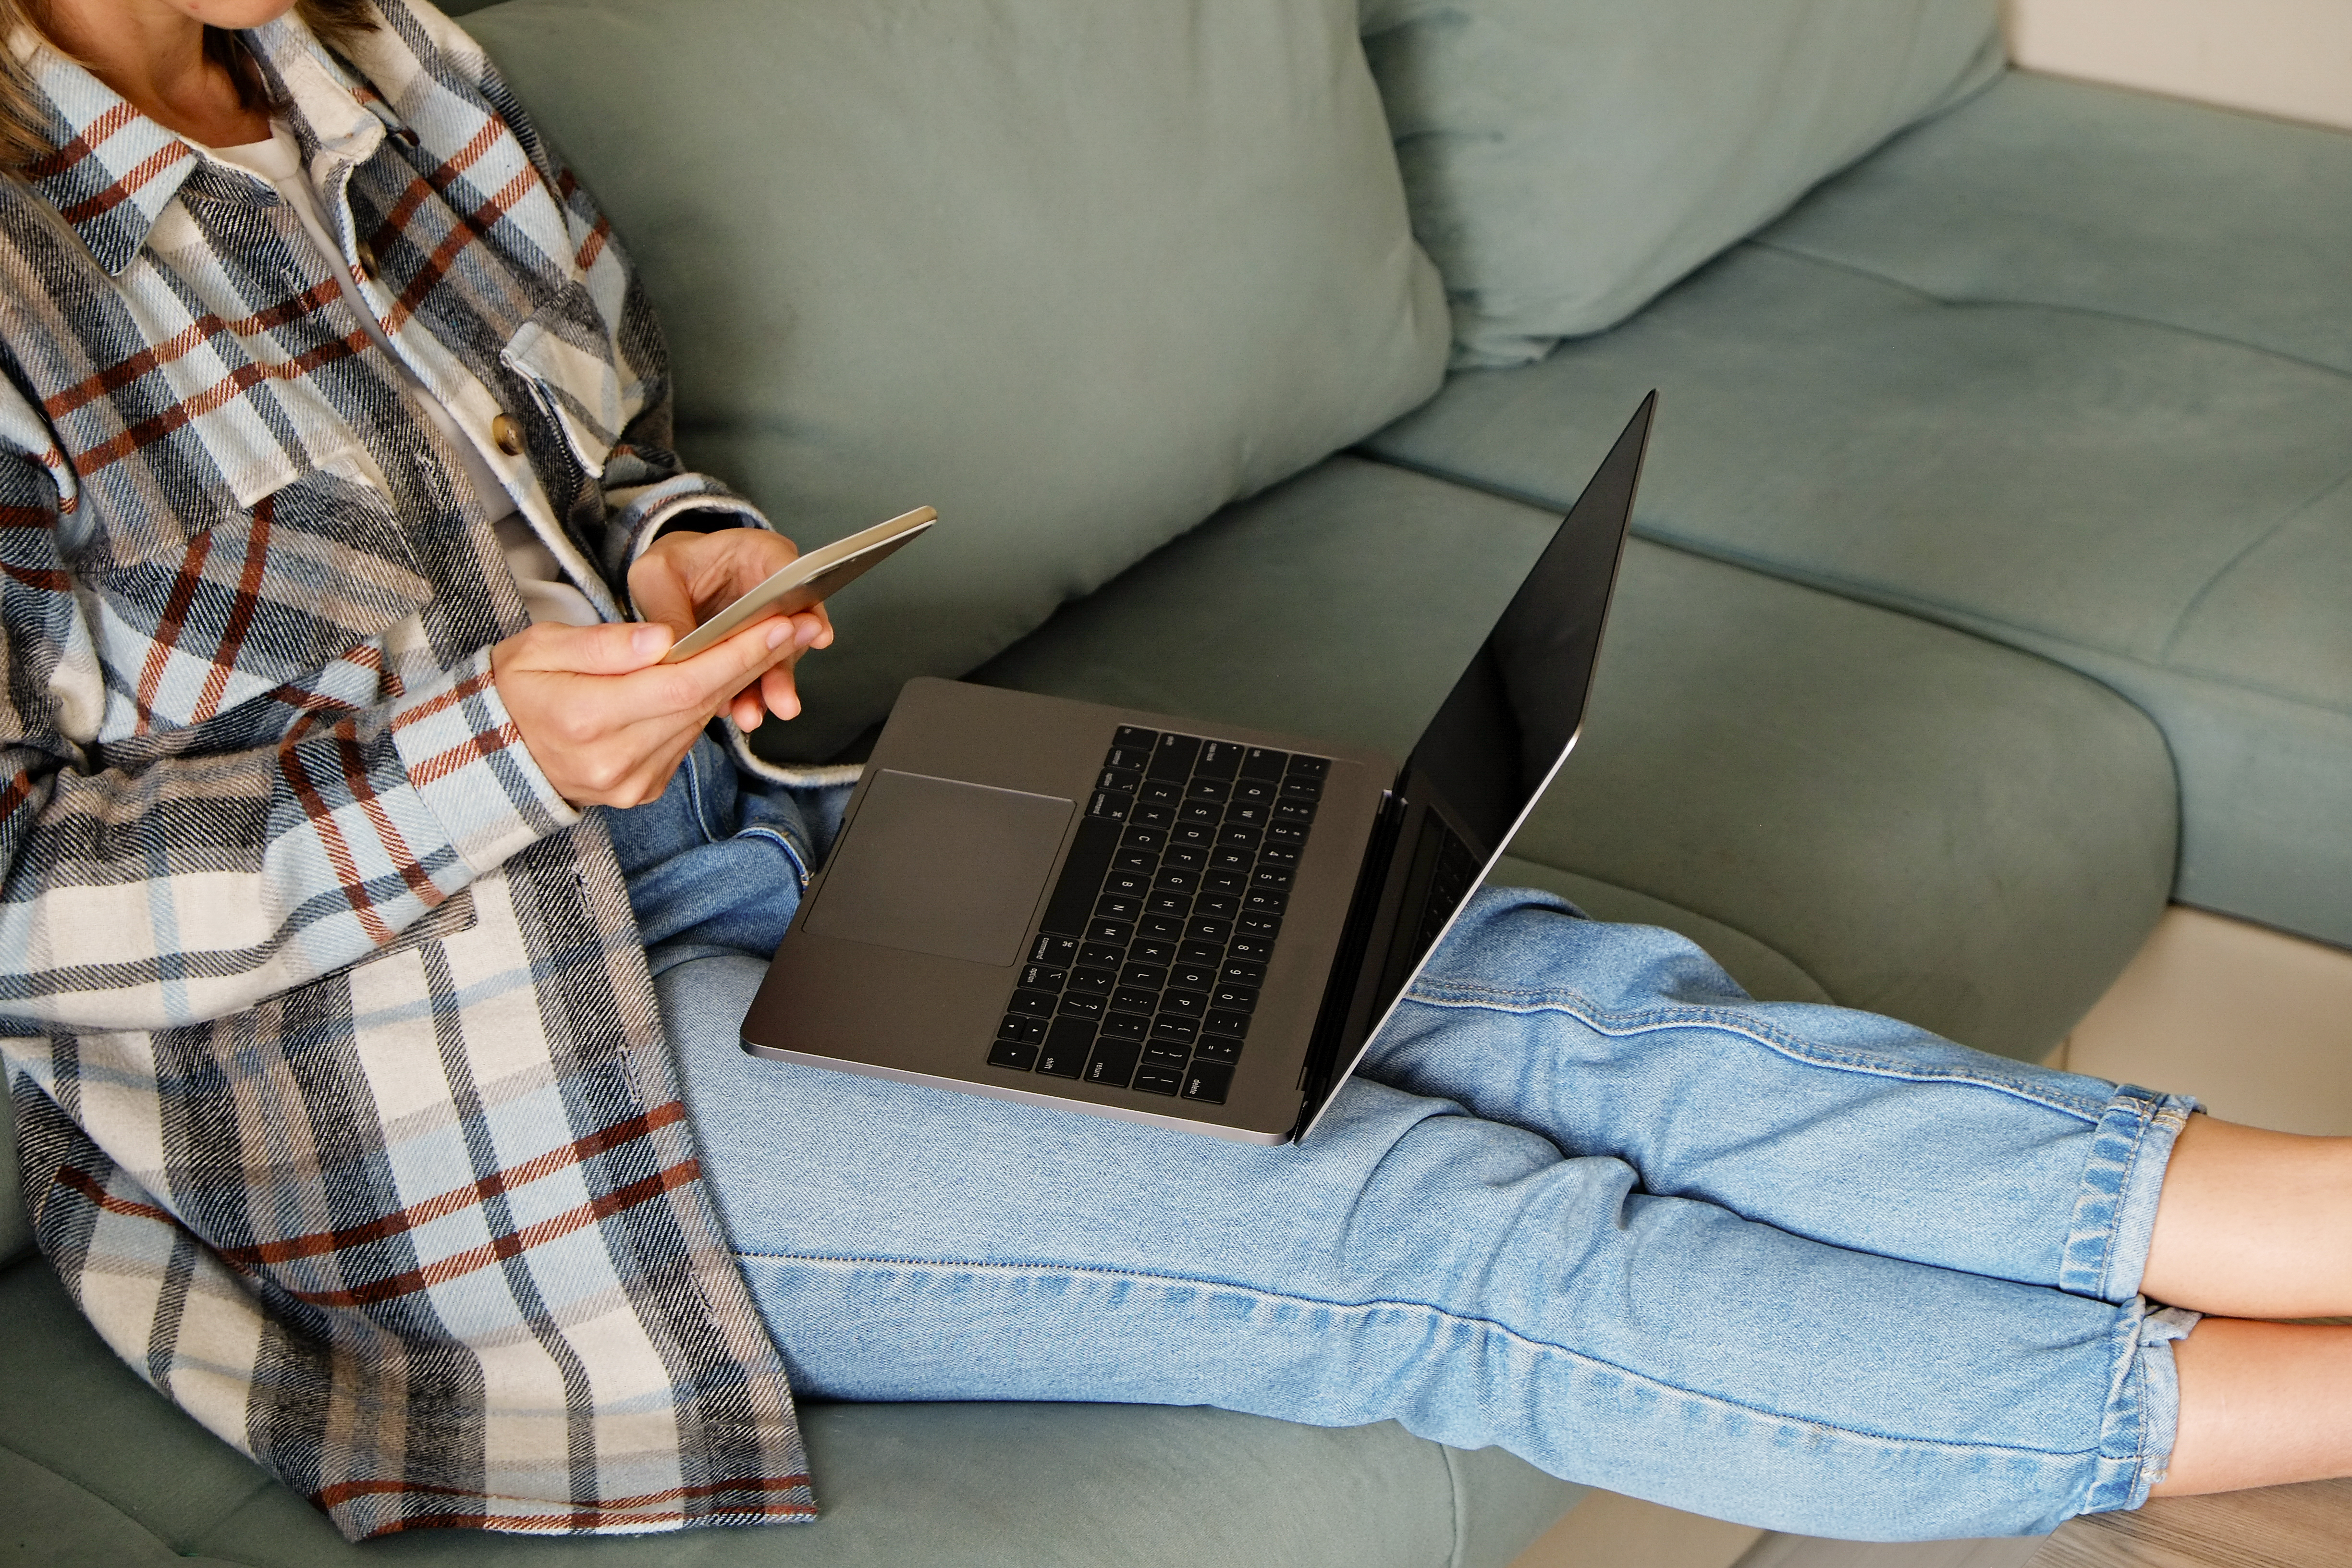 woman's body seated on a green comfy couch with her legs stretched out on a stool in front of her, she is wearing a flannel shirt and jeans and is using a cellphone and has an open laptop on her lap